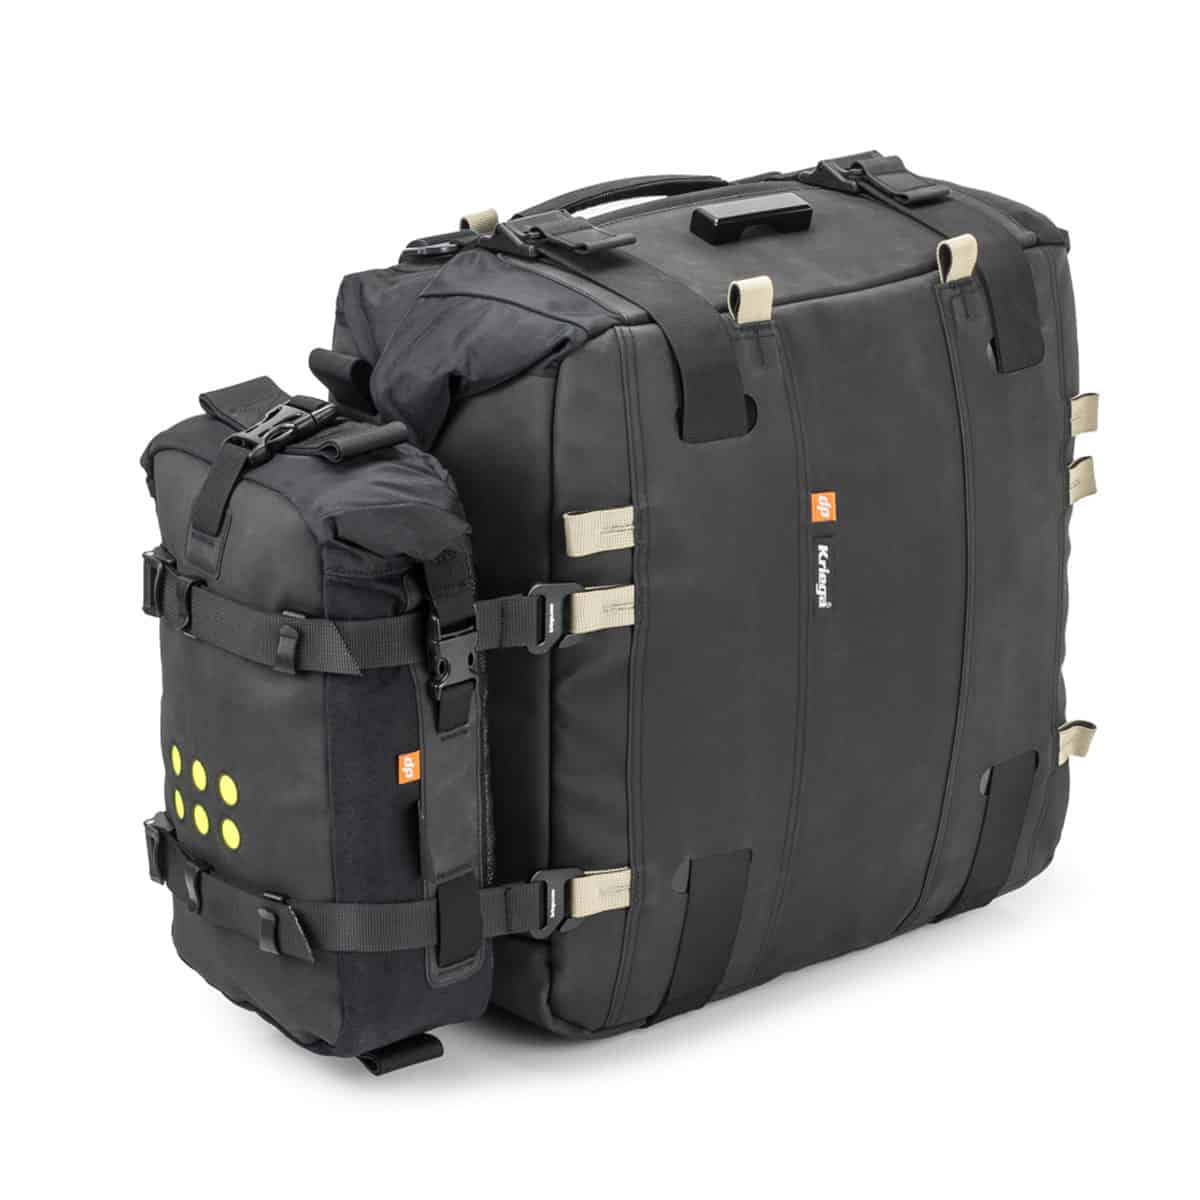 Kriega Overlander-S OS Packs: Serious luggage for serious adventures 6L with OS Panniers